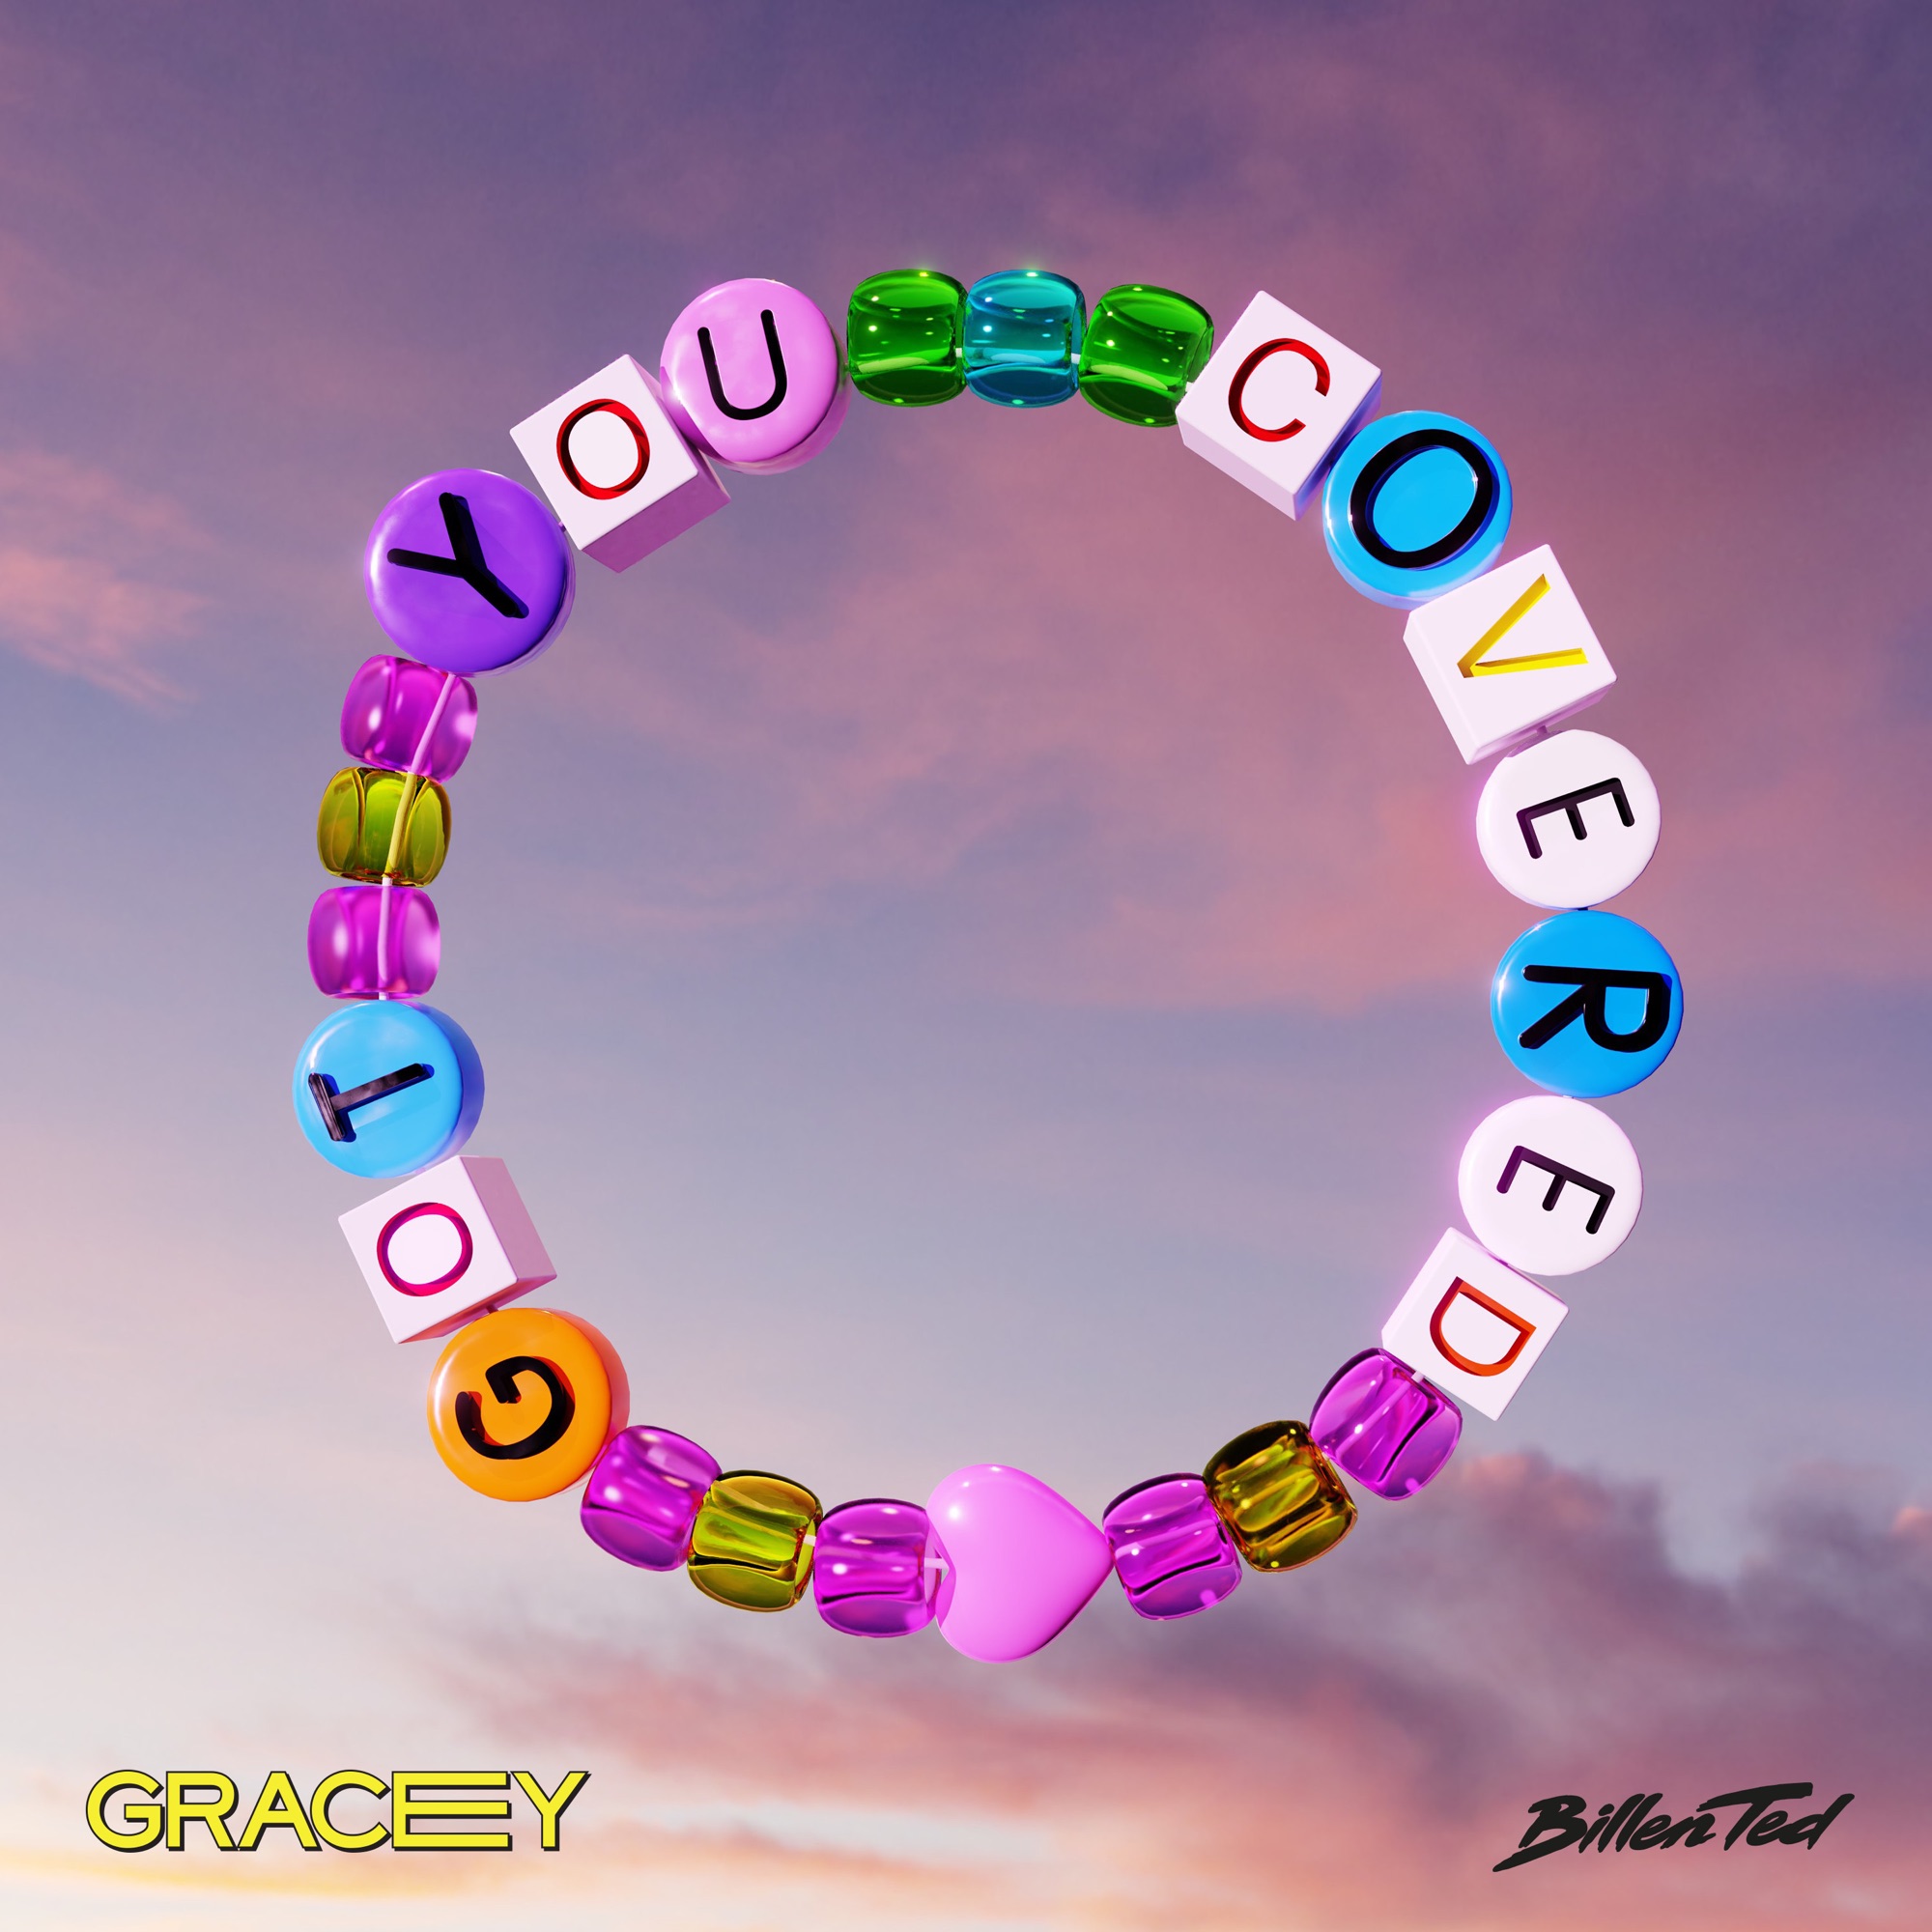 GRACEY & Billen Ted - Got You Covered - Single